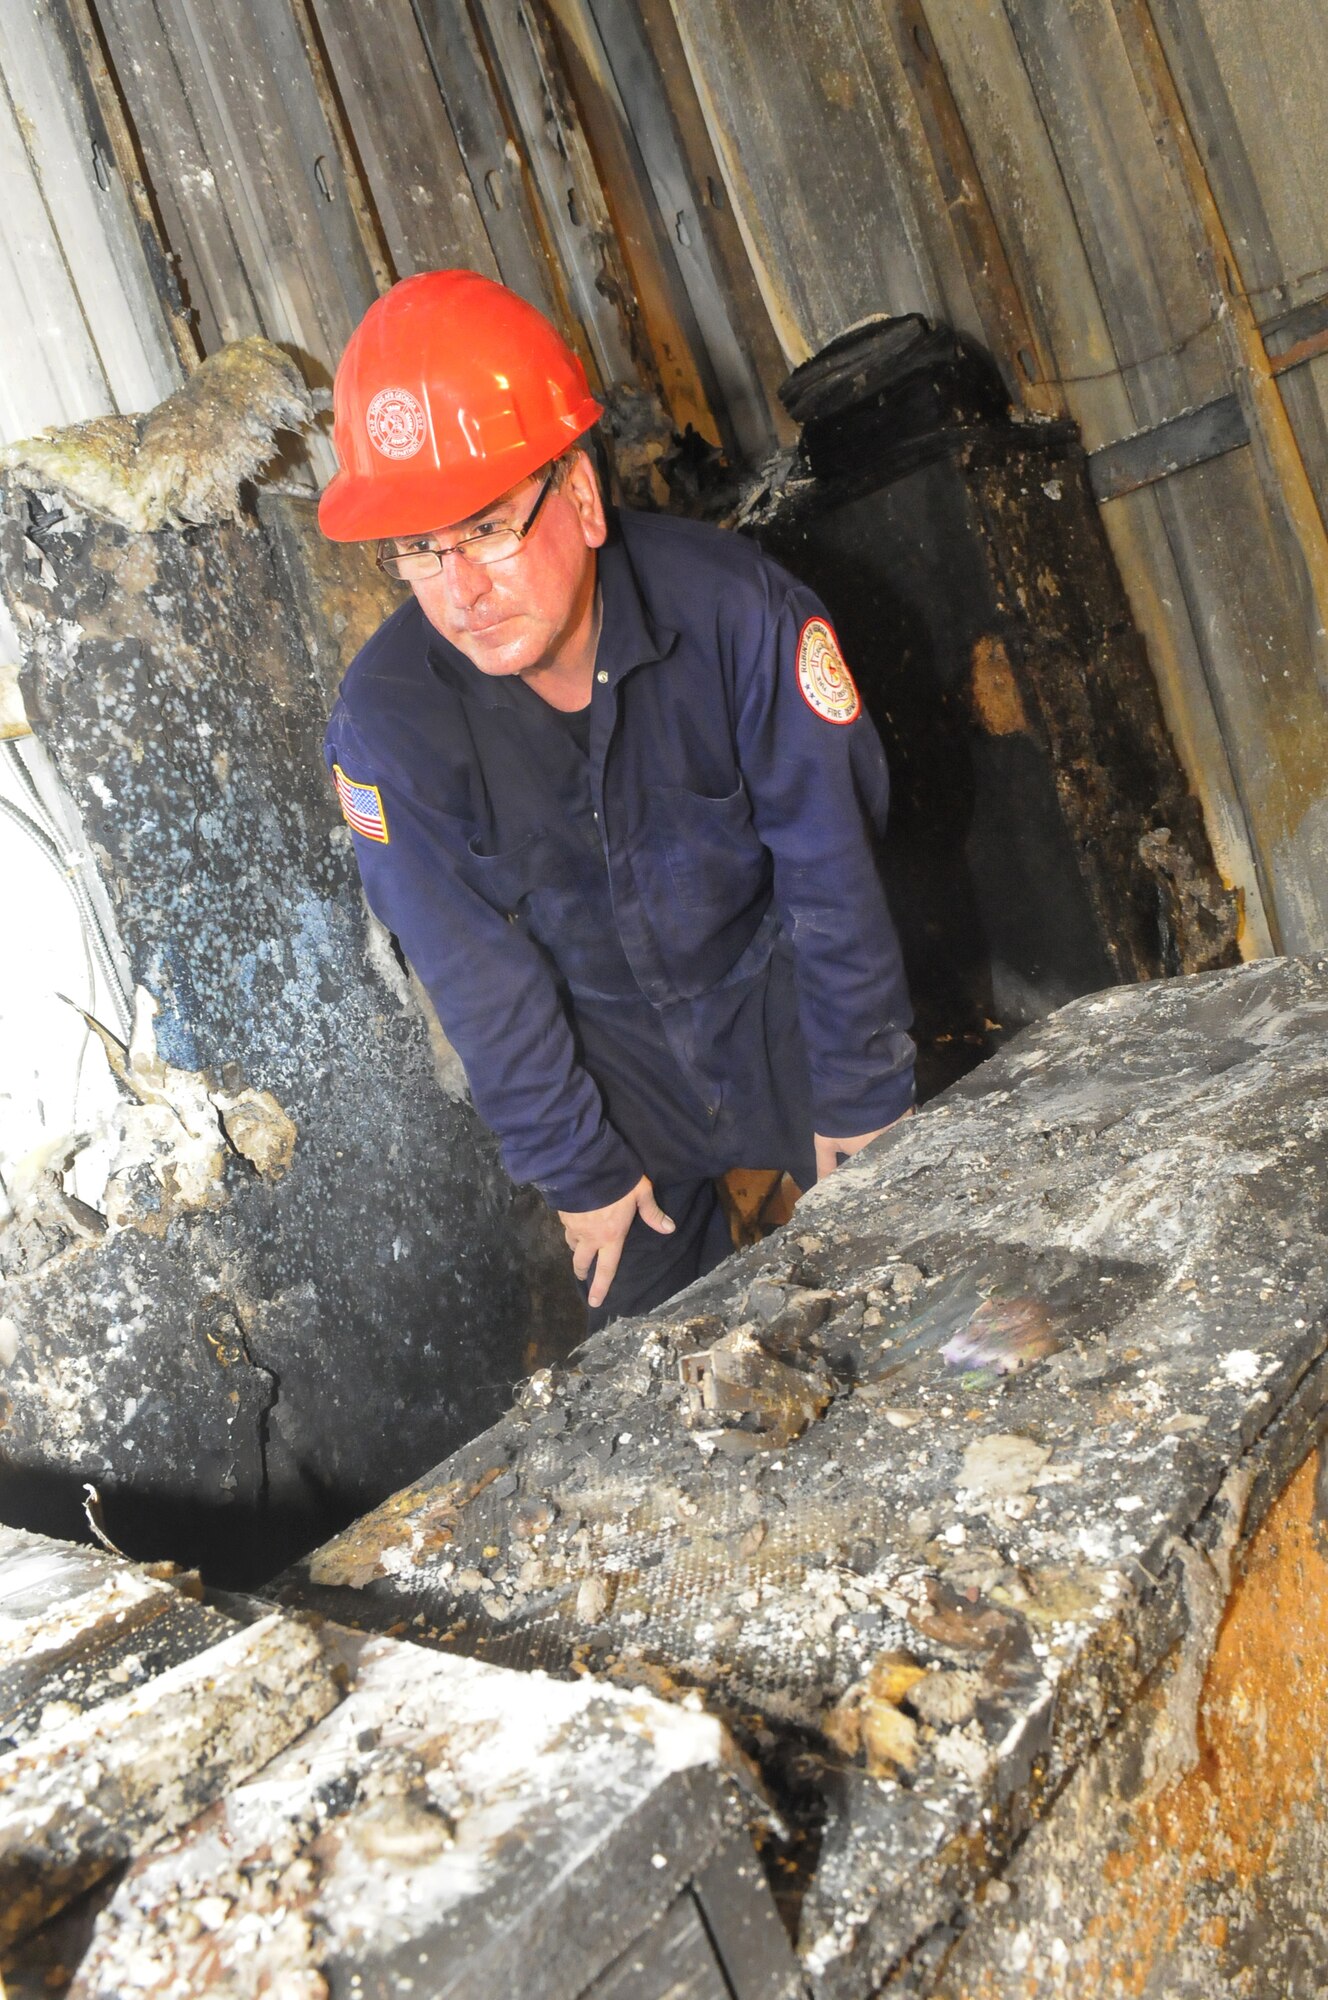 Tom Kennedy, assistant fire chief, Fire Prevention and Investigations, looks over fire damage in Bldg. 352 during his investigation. U. S. Air Force photo by Sue Sapp